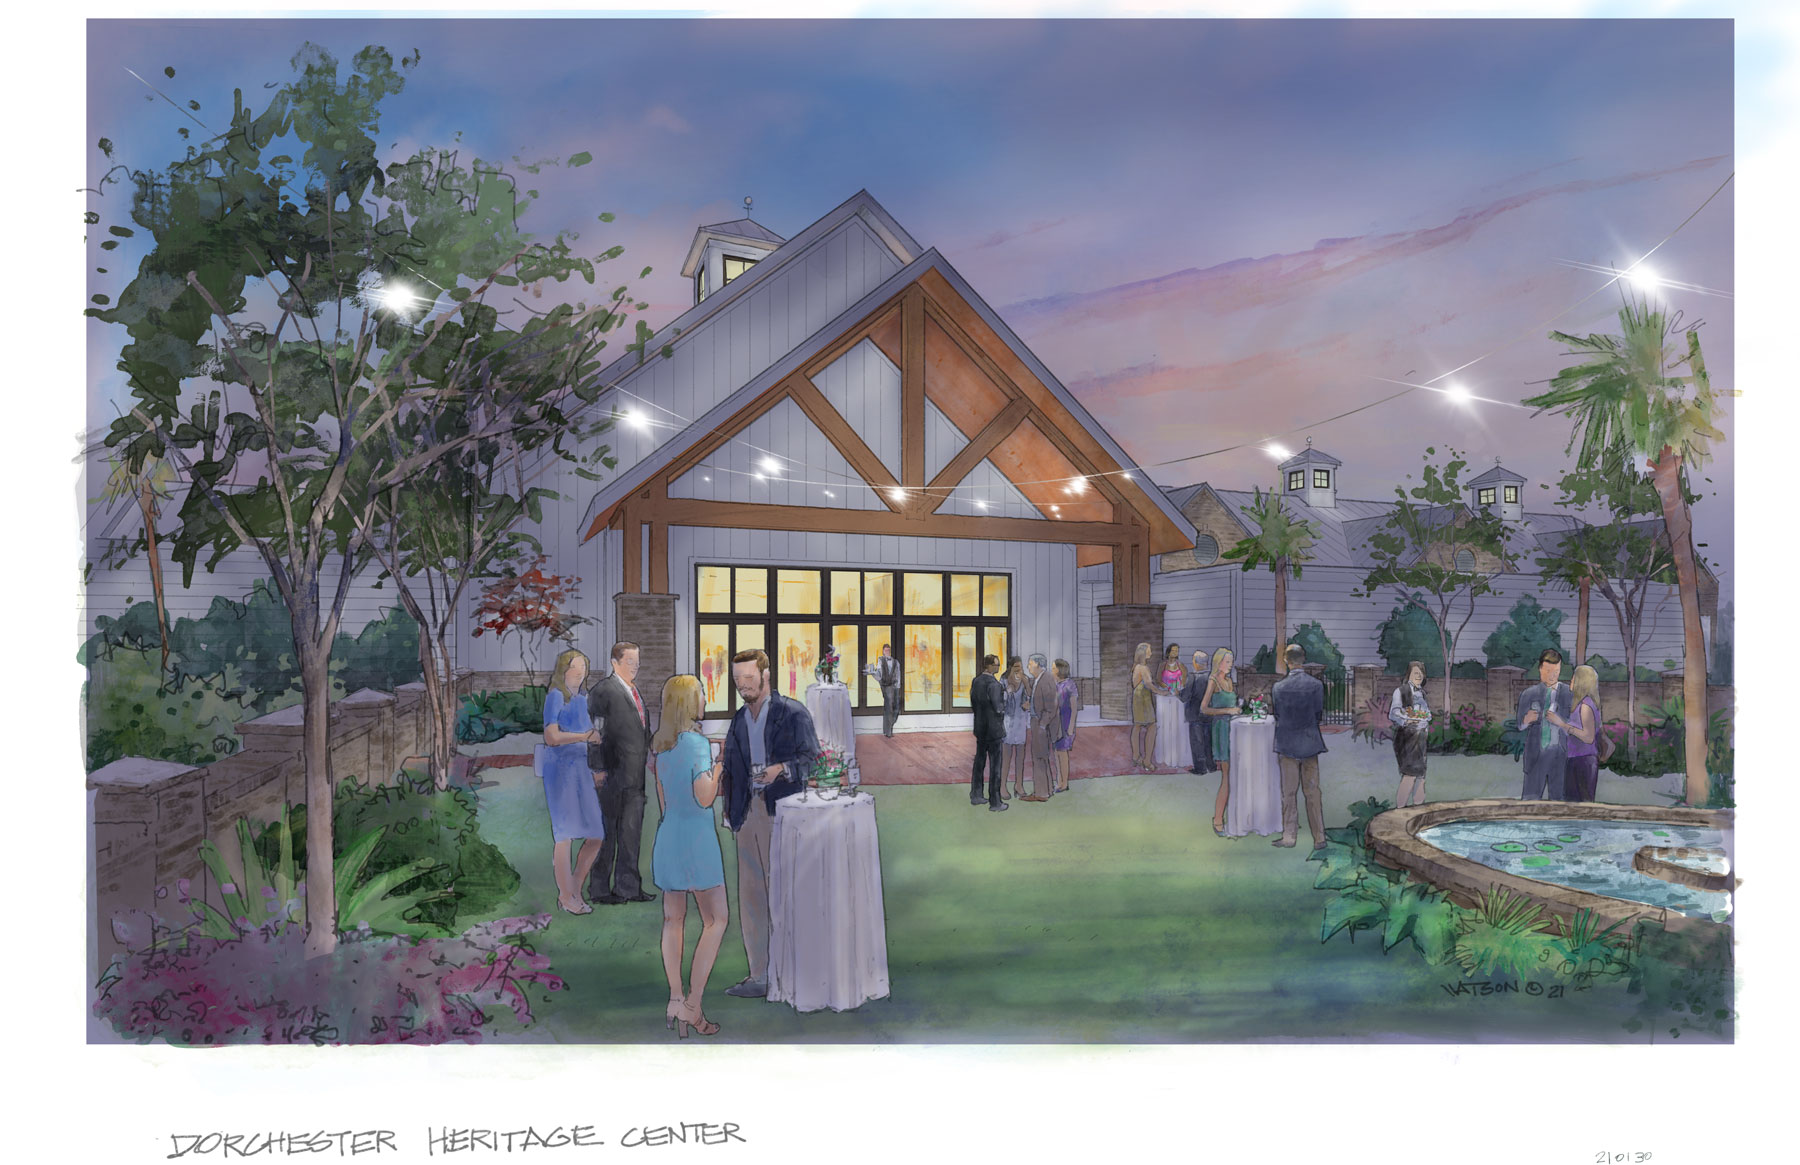 Dorchester County Heritage Center Dale Watson rendering of Swallowtail Architecture design